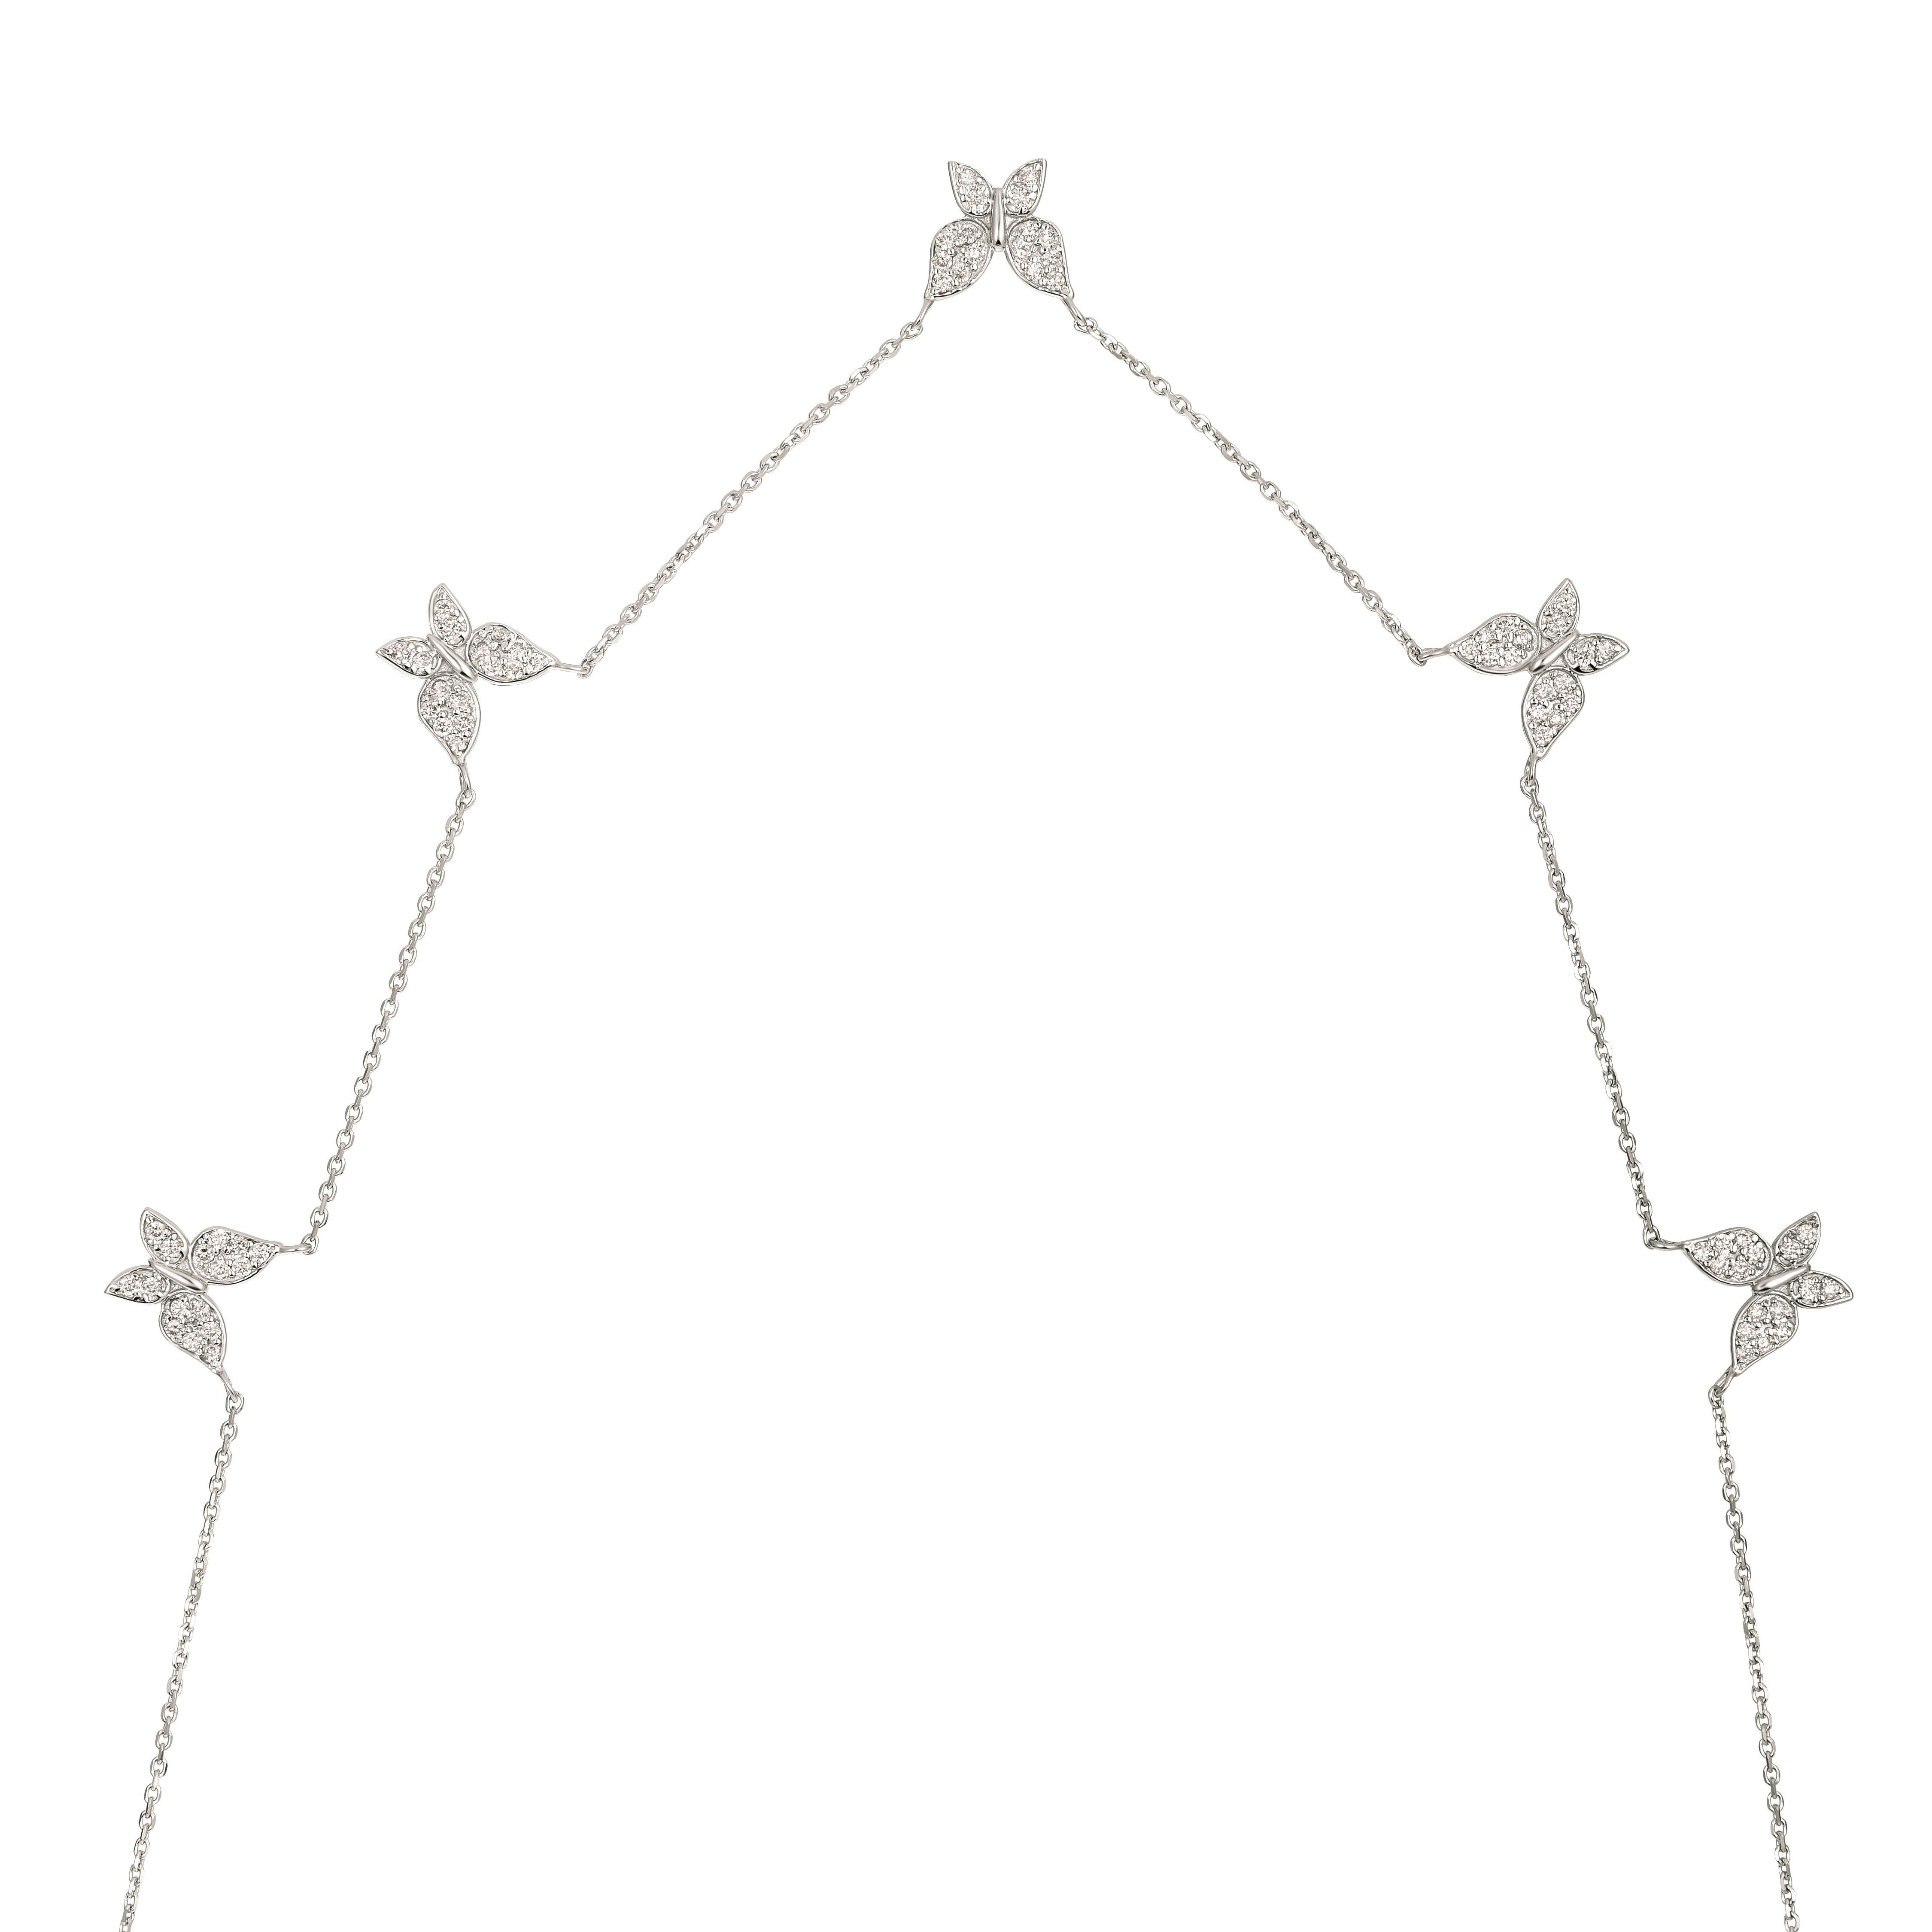 0.75 Carat Natural Diamond Butterfly Necklace 14K White Gold G SI 18 inches chain

100% Natural Diamonds, Not Enhanced in any way Round Cut Diamond Necklace
0.75CT
G-H
SI
14K White Gold, Pave style , 3.8 grams
7/16 inch in height, 7/16 inch in